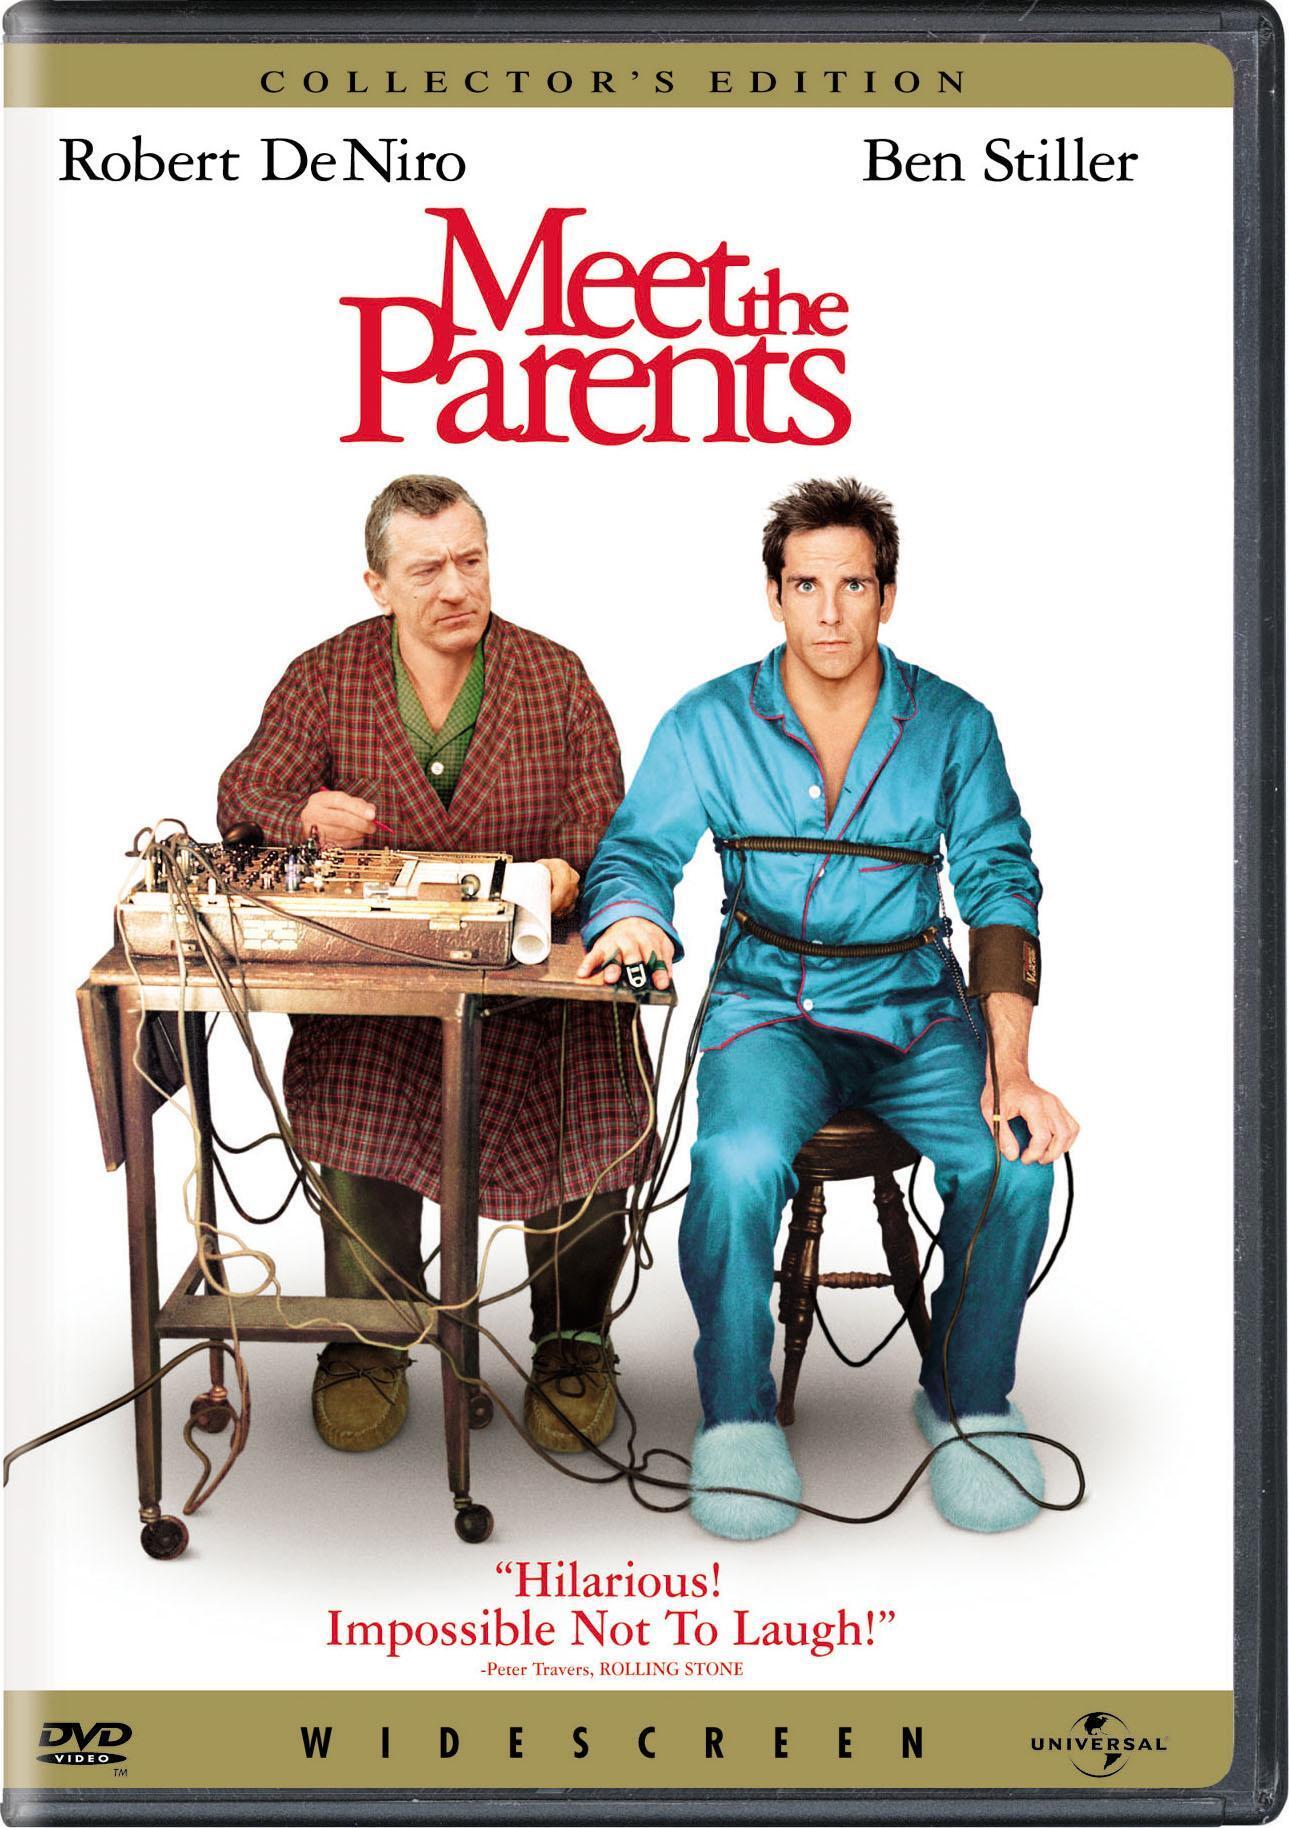 Meet The Parents (Collector's Edition) - DVD [ 2000 ]  - Comedy Movies On DVD - Movies On GRUV